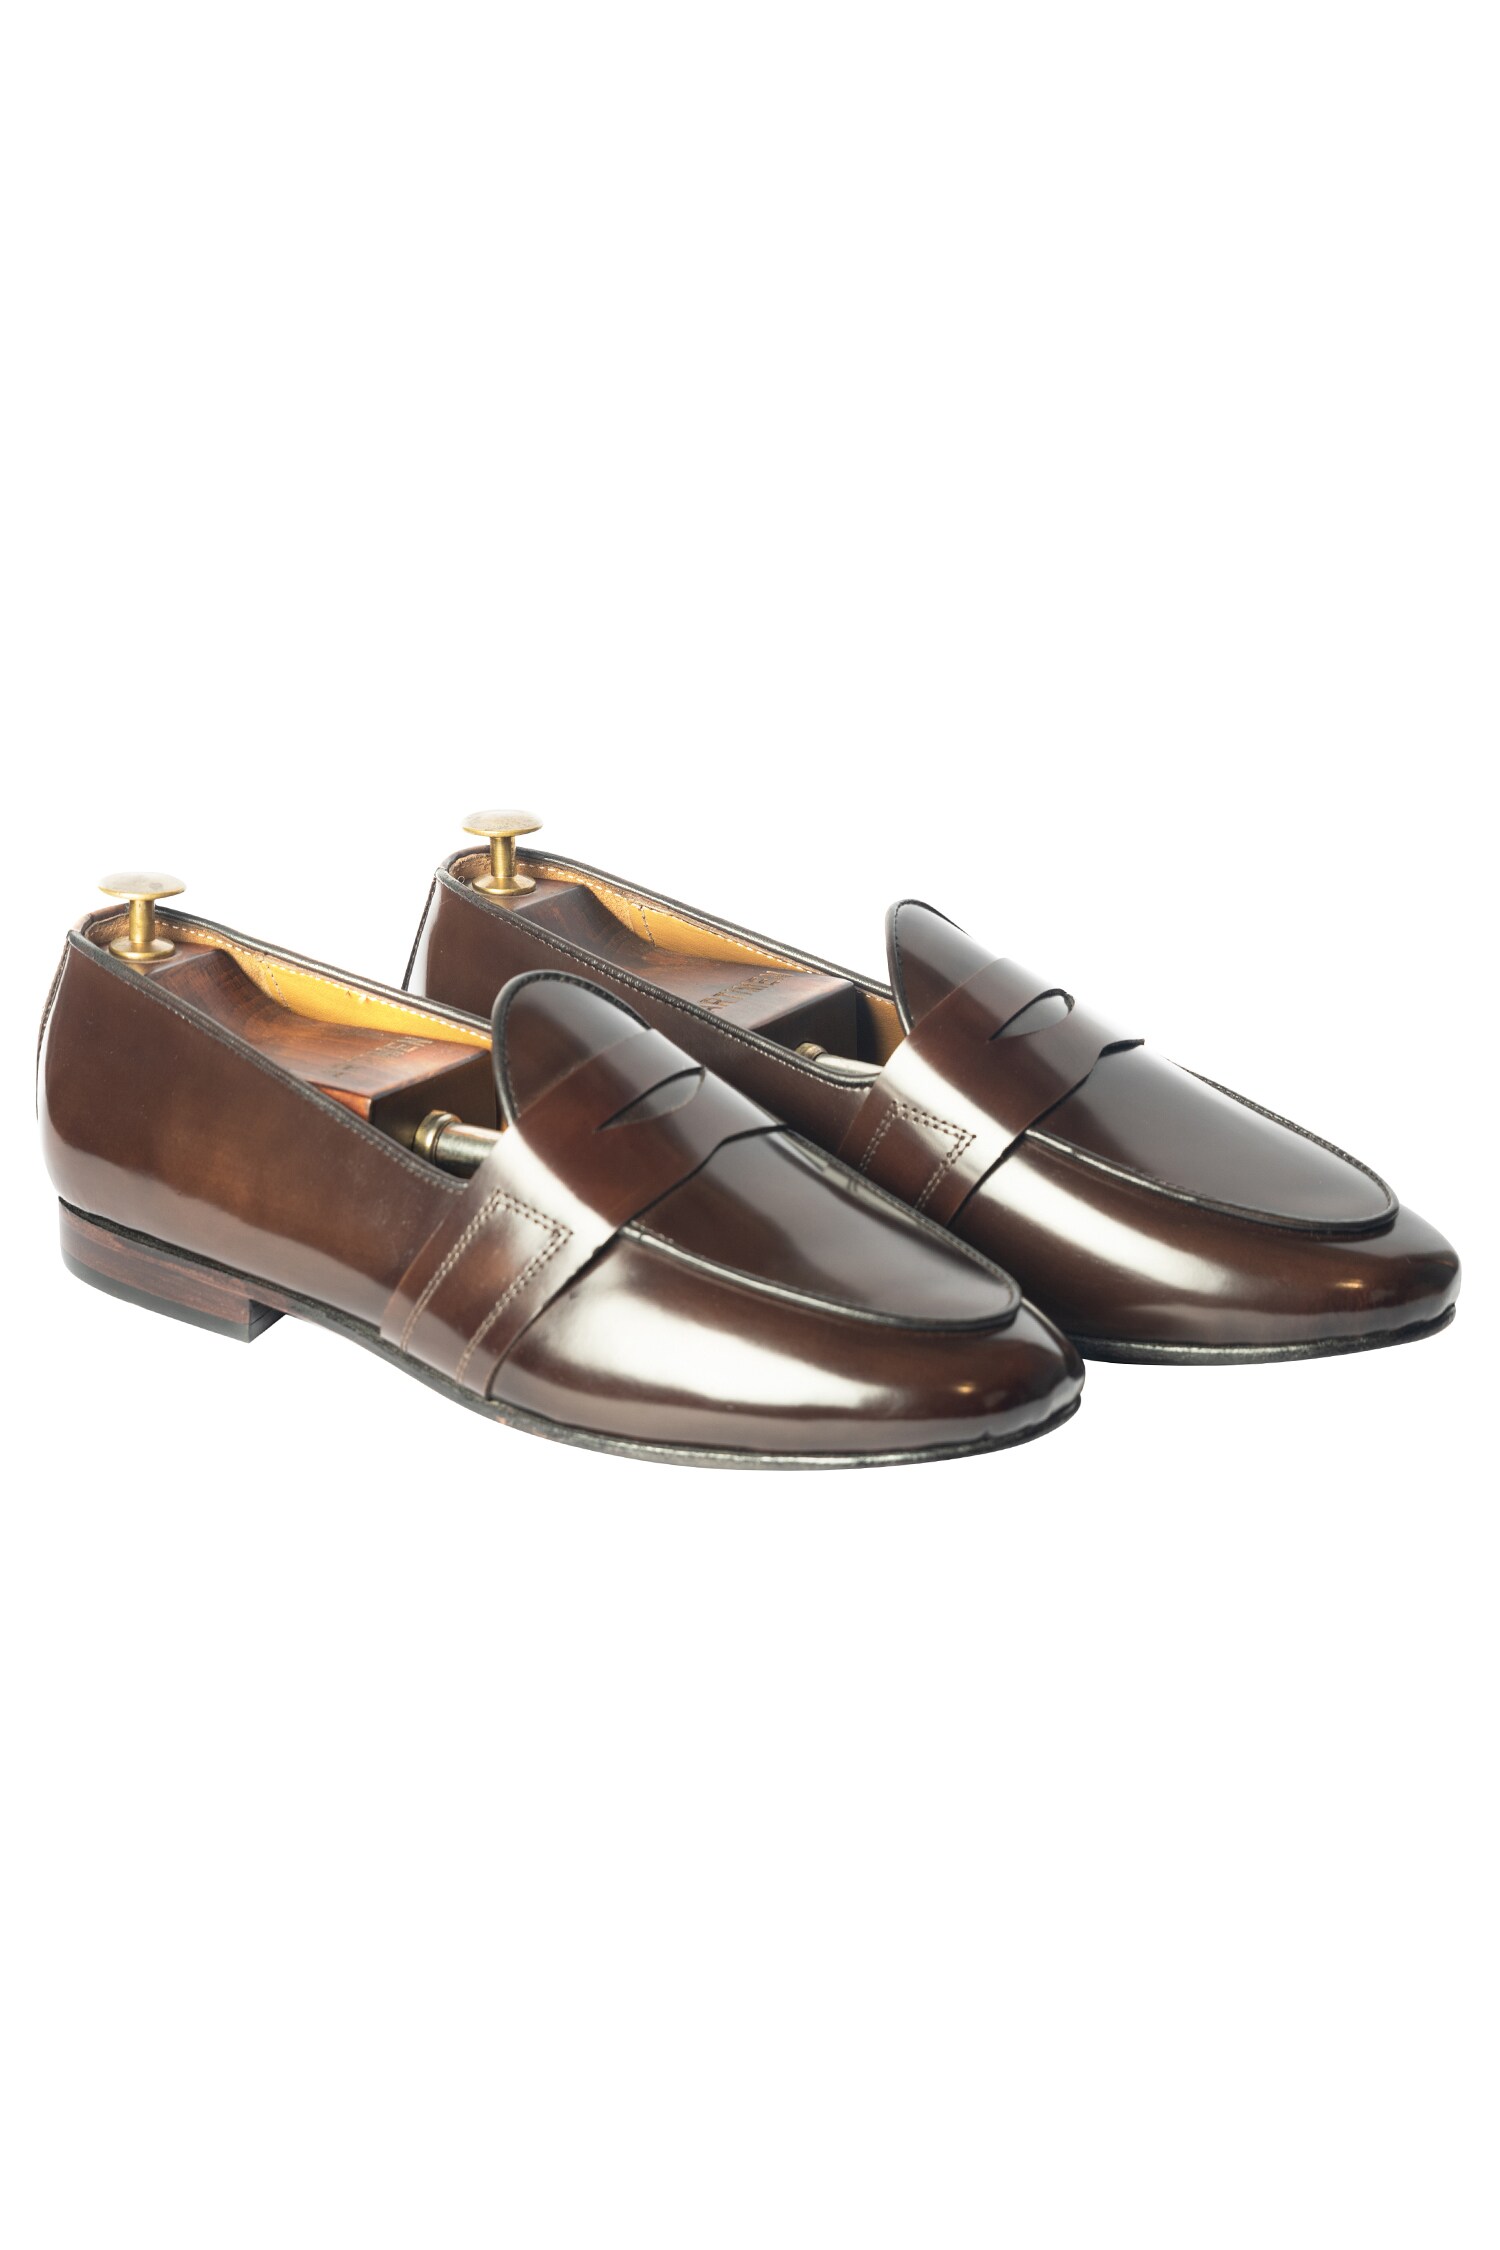 Buy Brown Handcrafted Penny Loafers For Men by Artimen Online at Aza ...